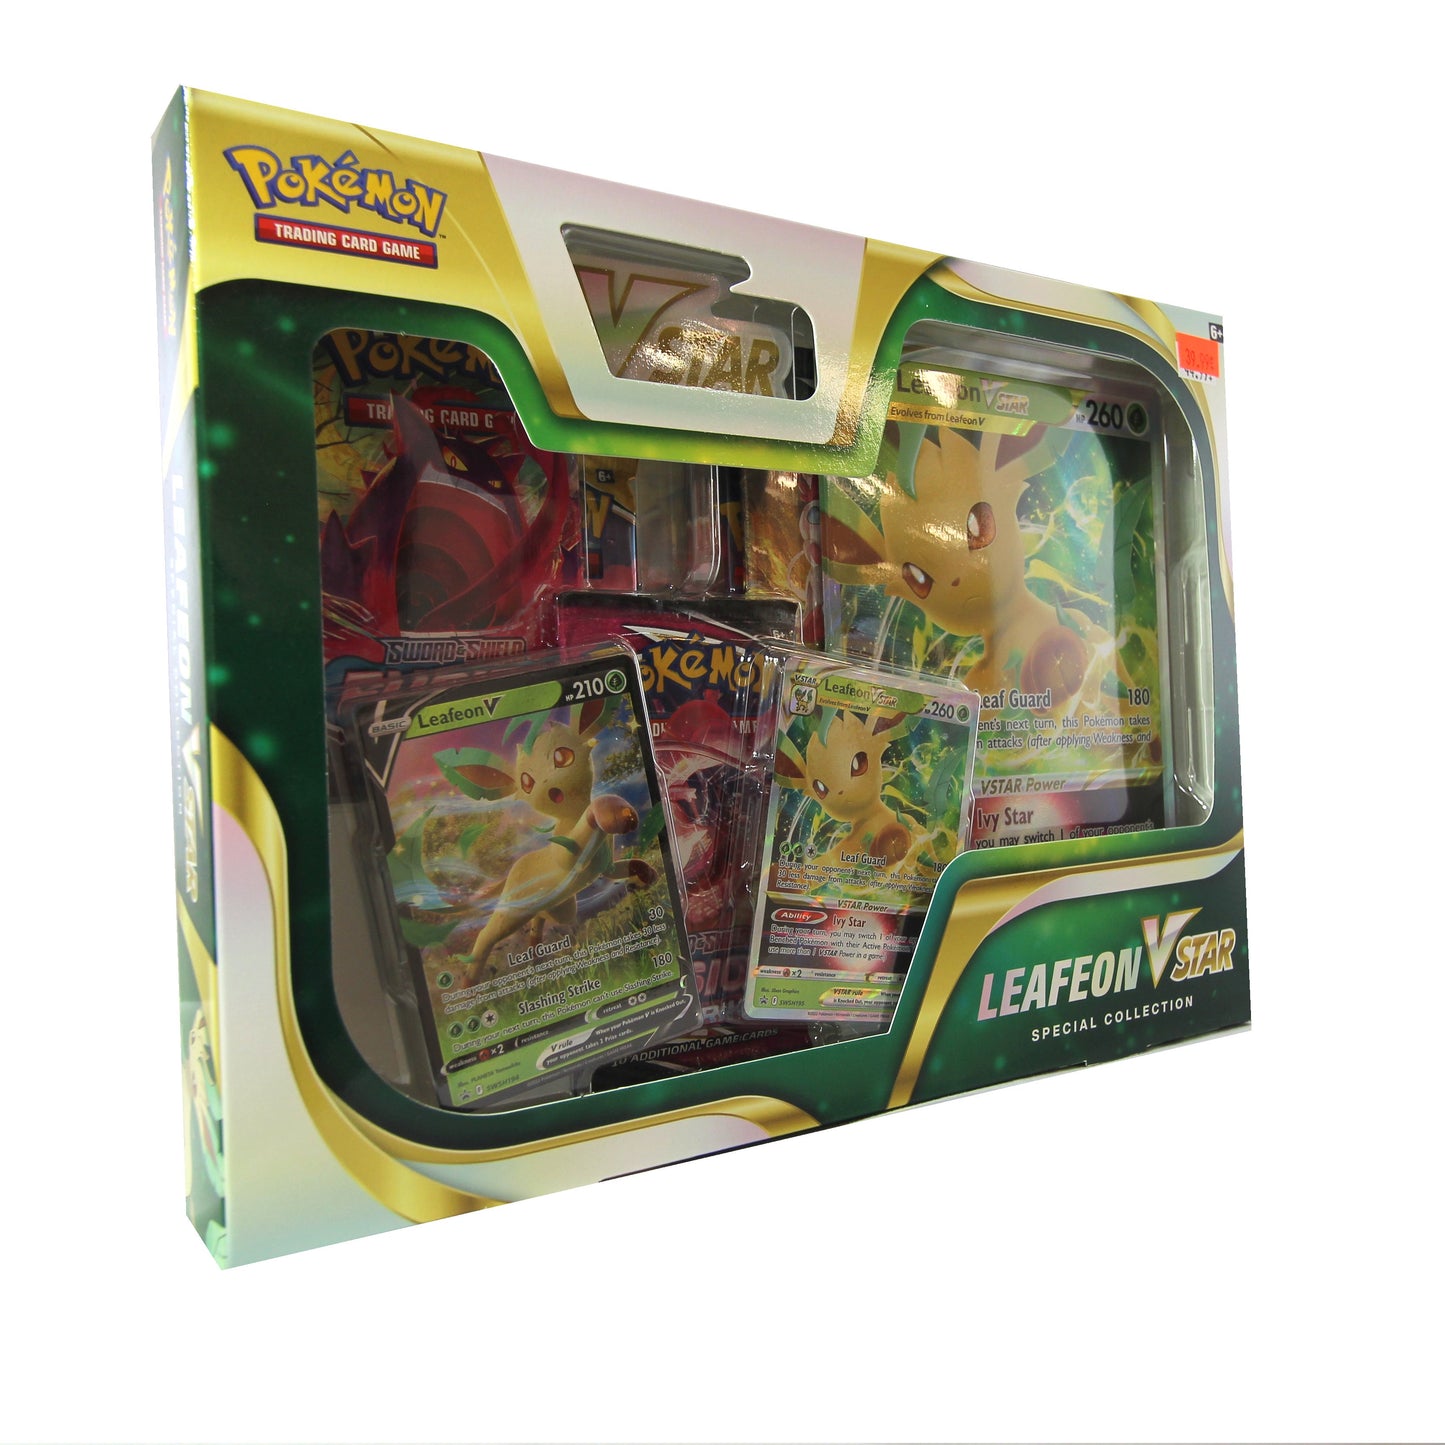 Pokémon Leafeon V Star Special Collection Gift Box